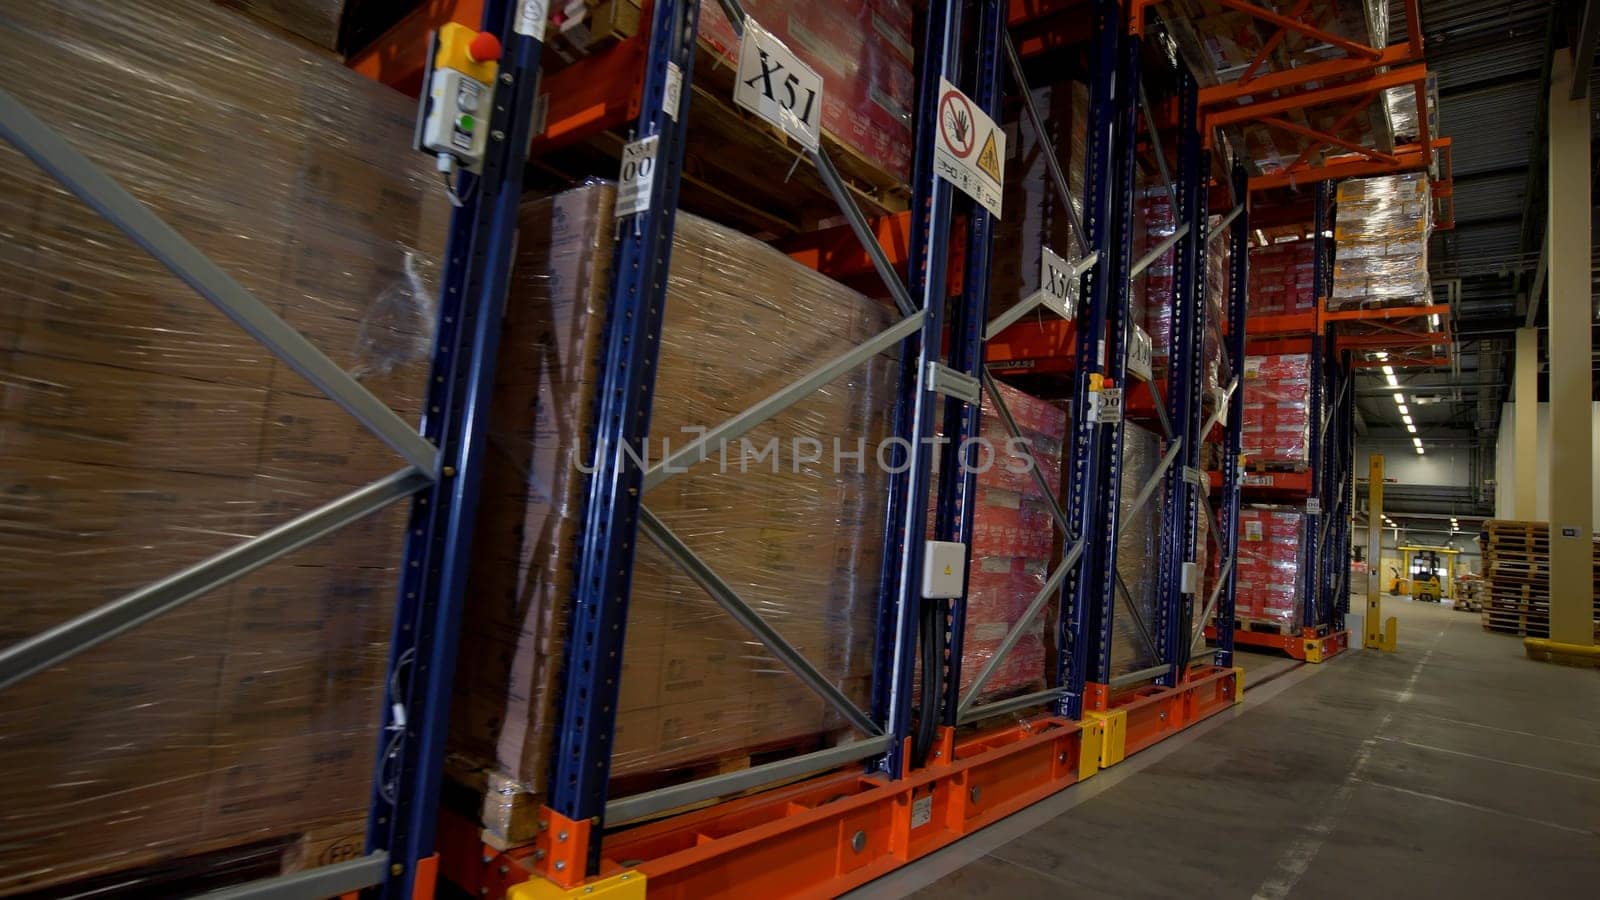 Moscow - Russia, 04.20.2022: Warehouse materials and metal shelves with goods inside cardbox boxes. Creative. The camera moves among the shelves with different boxes. by Mediawhalestock